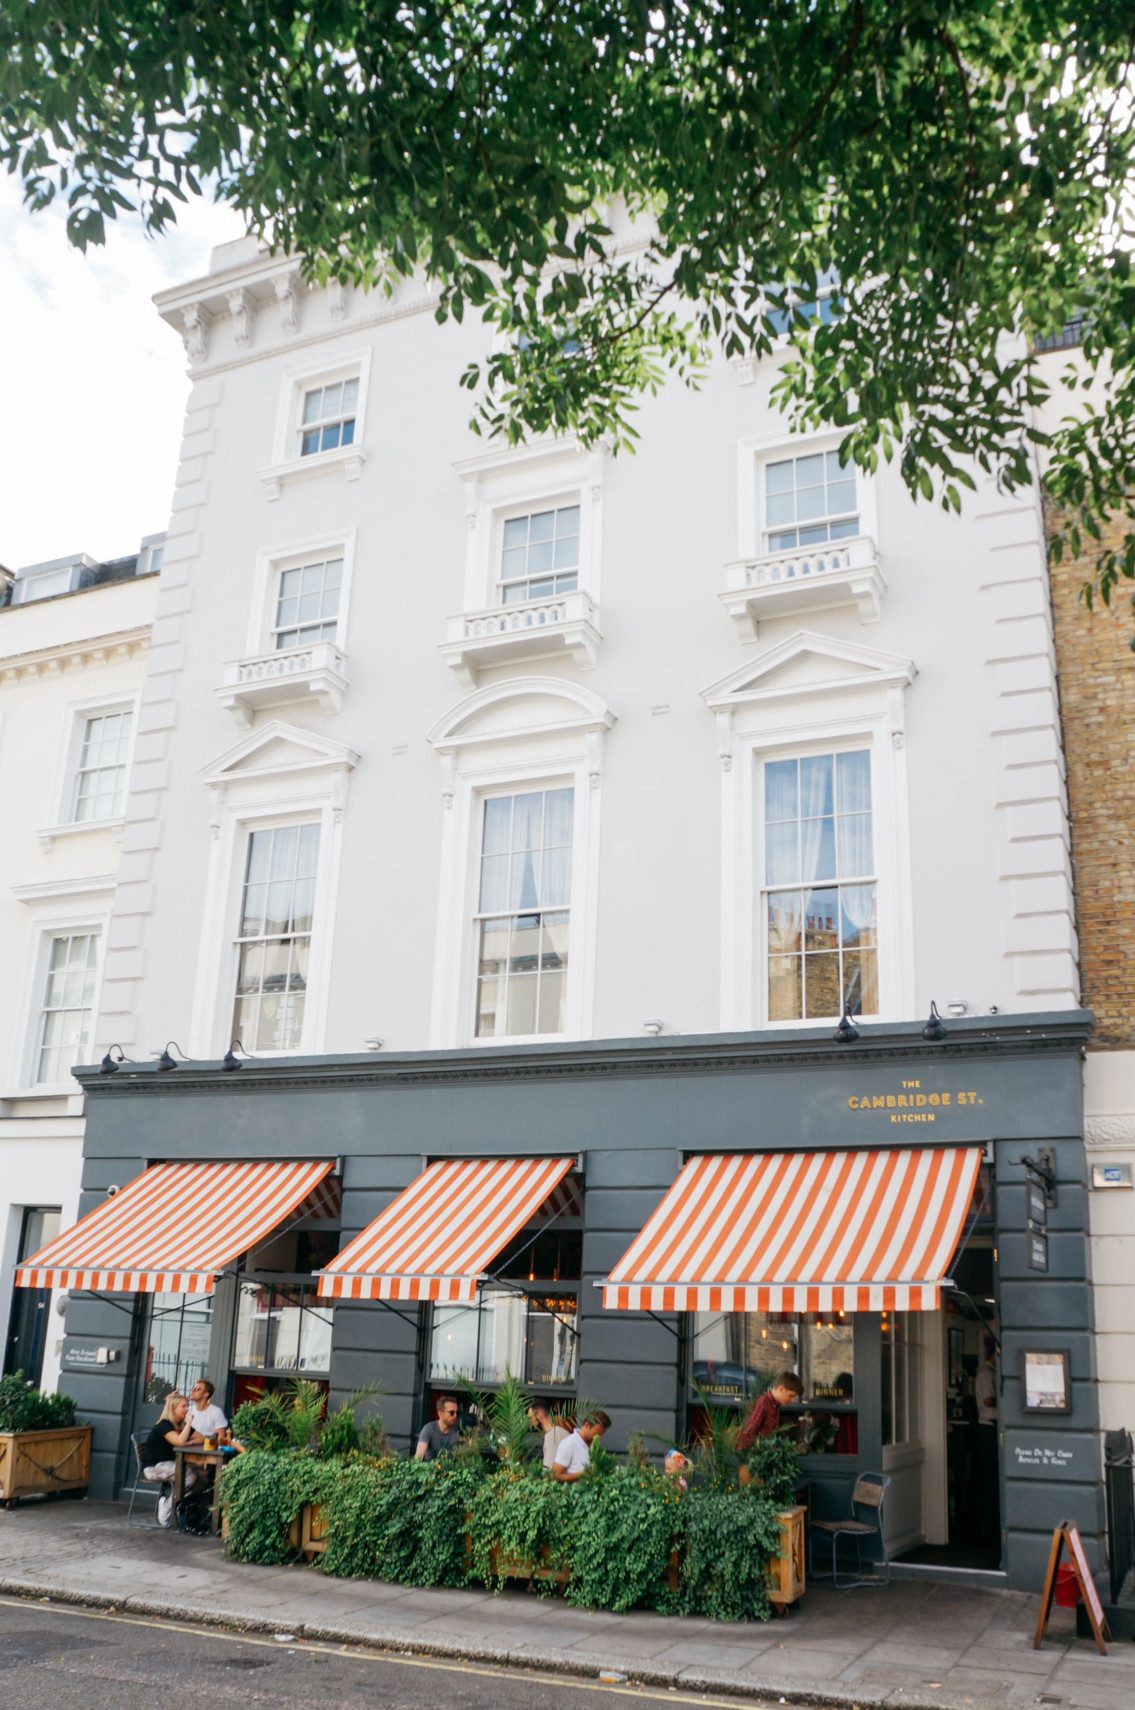 This cool London hotel will make you feel like a local! All the rooms are decorated by local artists - it's a great boutique London hotel for people looking for stylish lodging. #londontravel #londonhotels